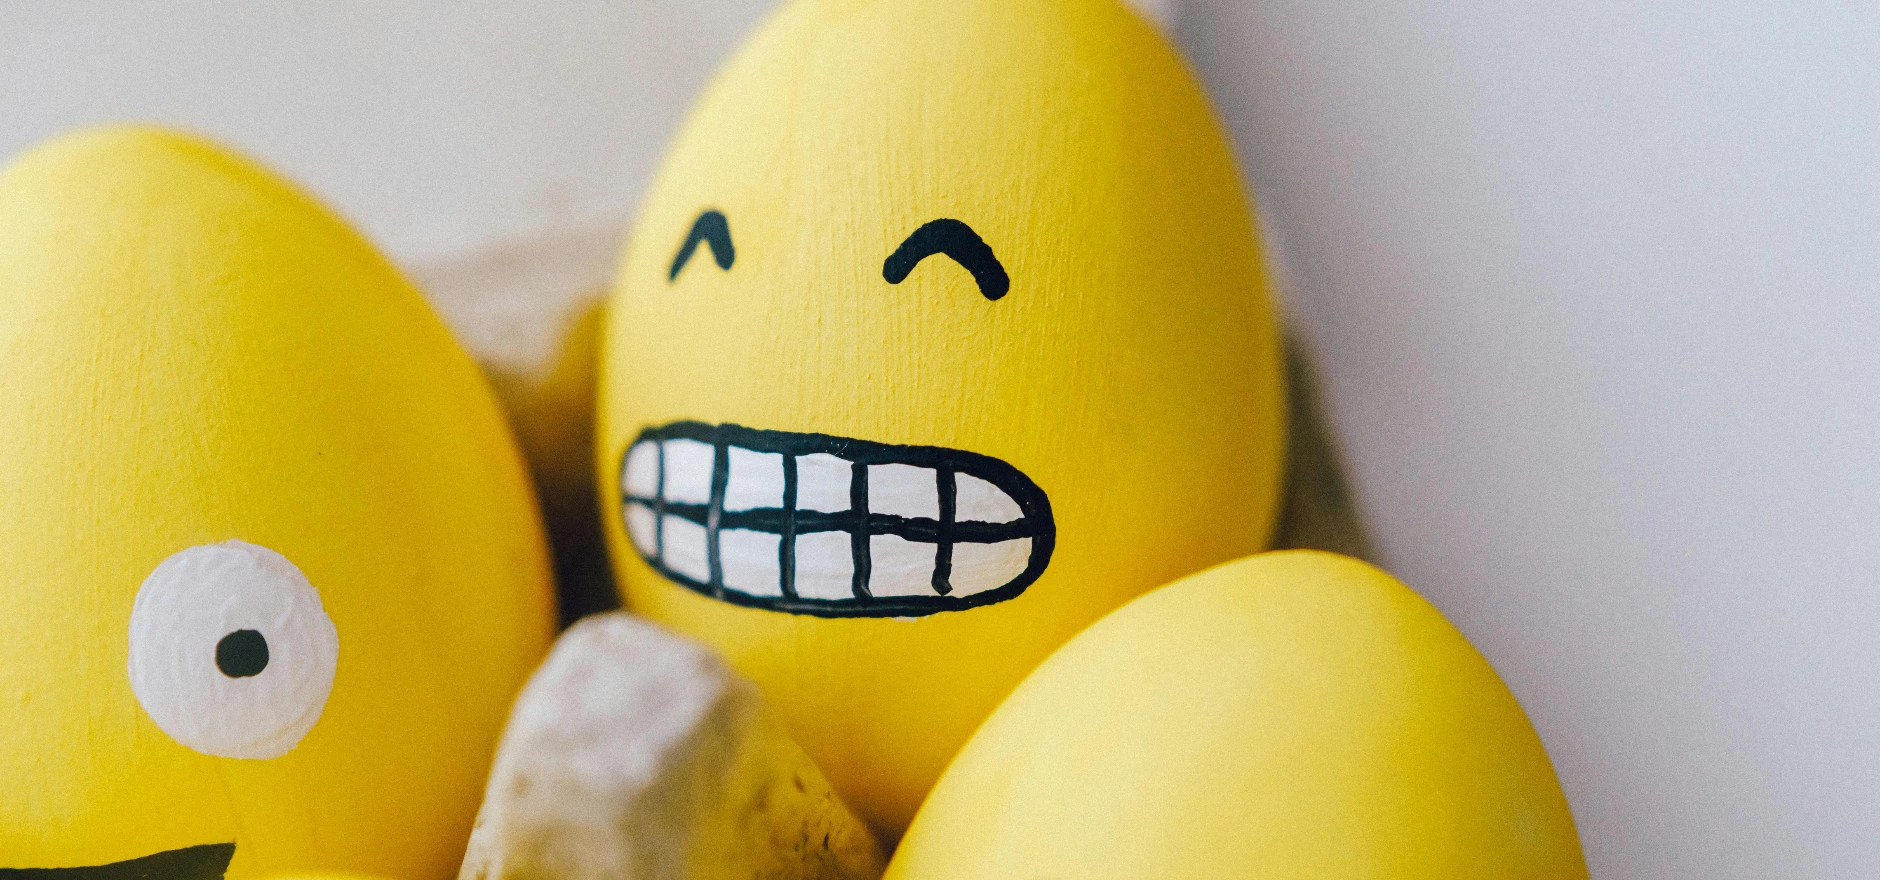 Yellow Painted Egg With Smiley Emoticonn